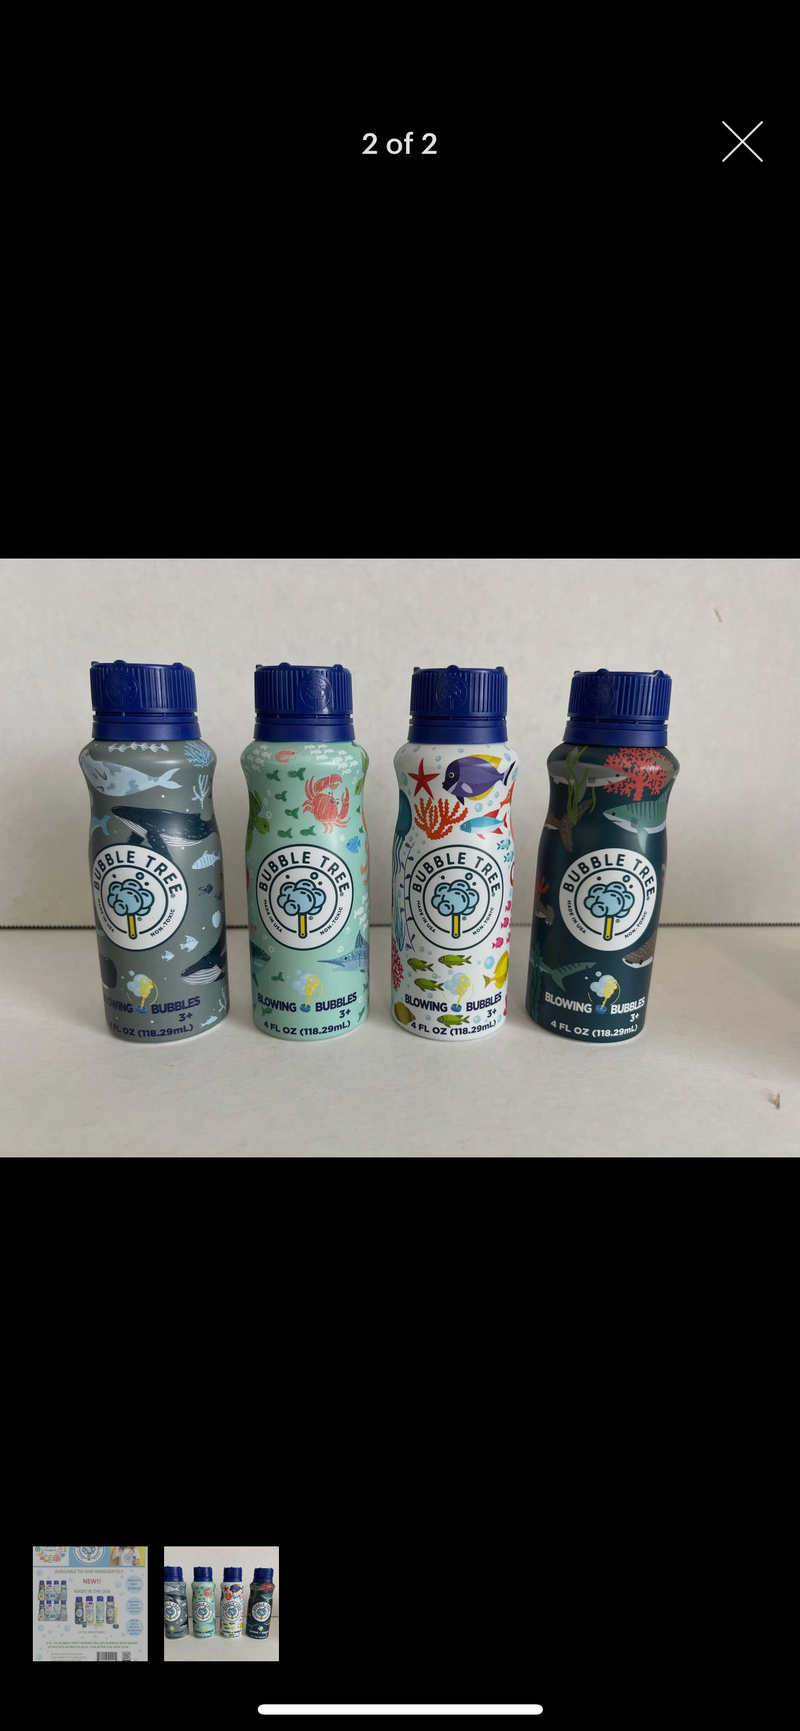 Sea Life Beach 4oz Aluminum Bottle with Bubbles and Wand